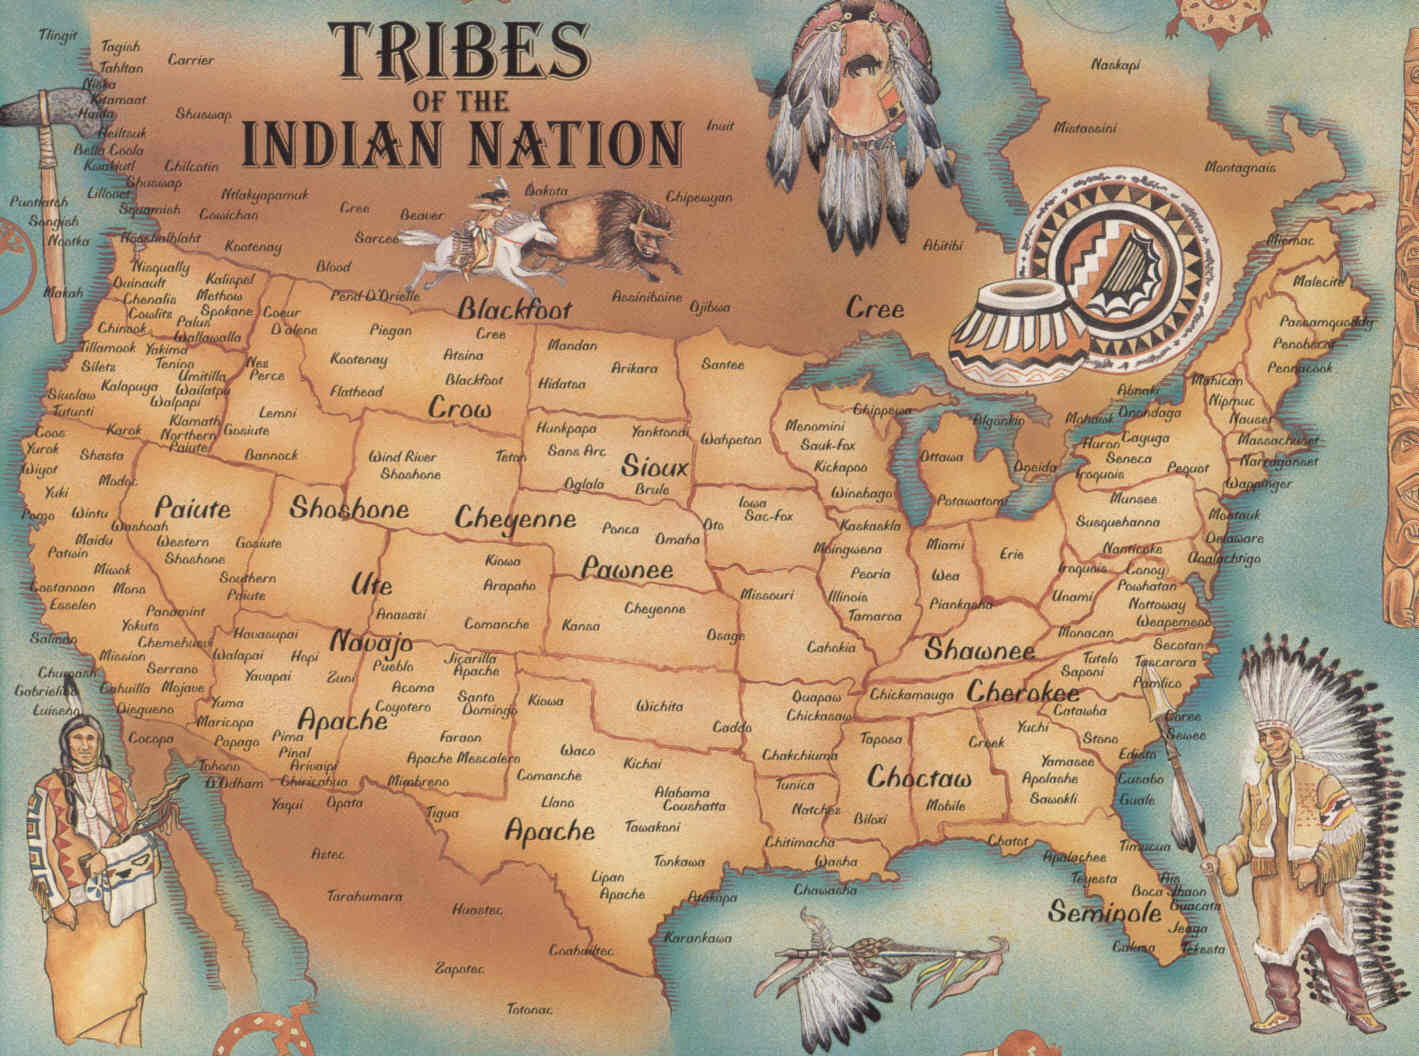 Native American Tribes Map